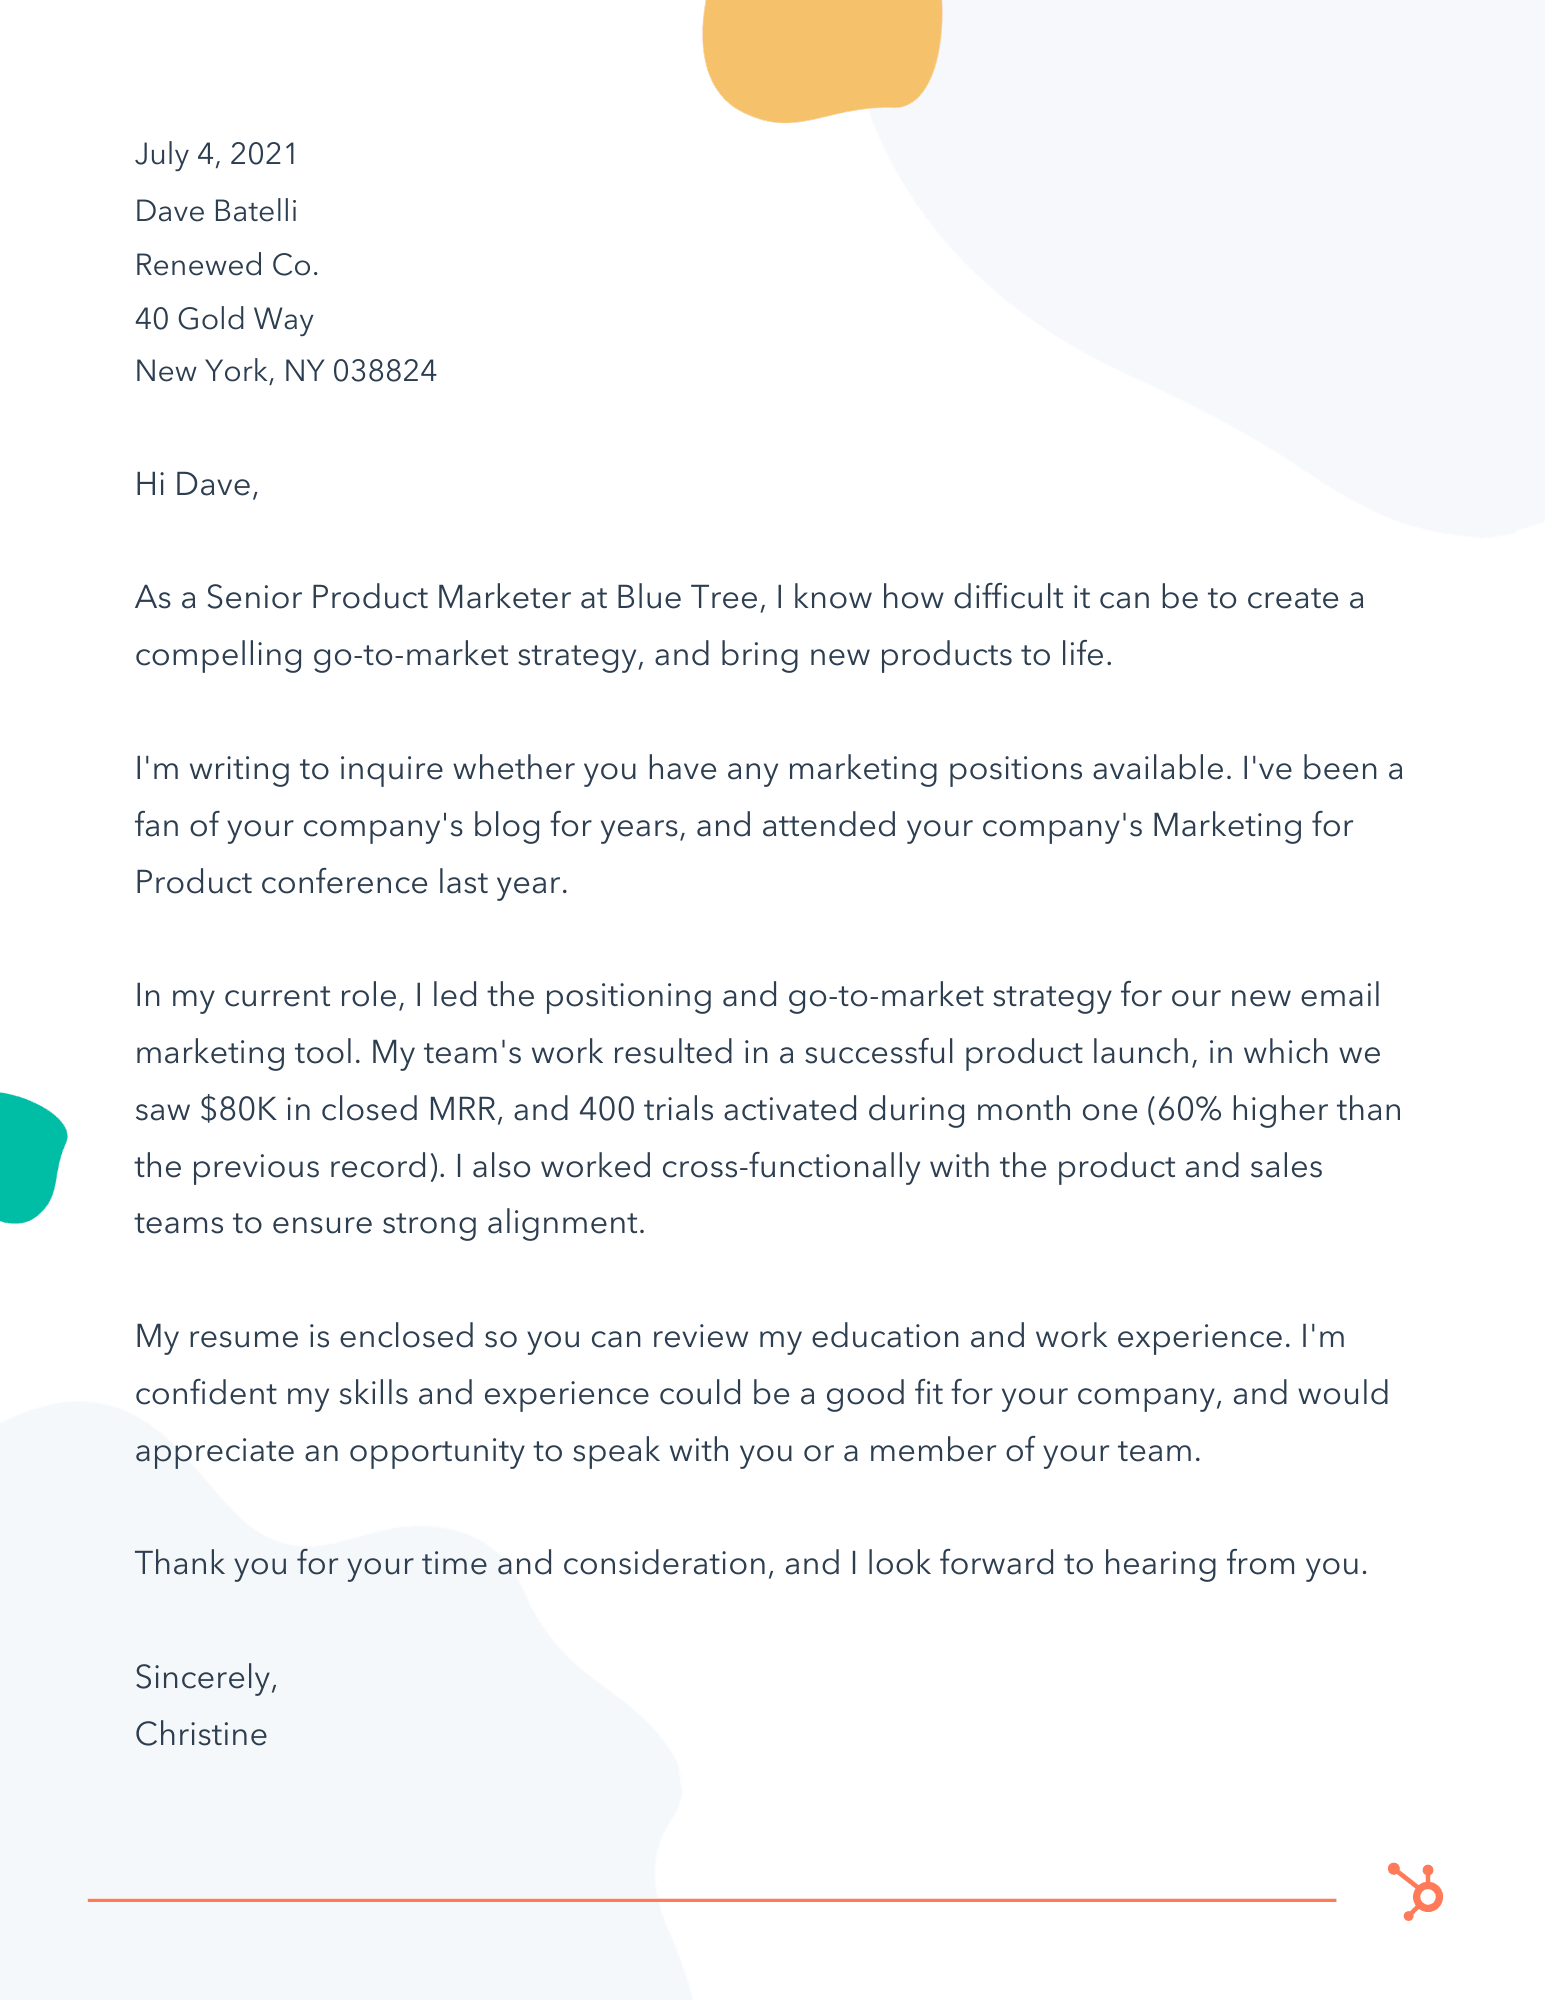 How to Write a Letter of Interest in 16 [Examples + Template]